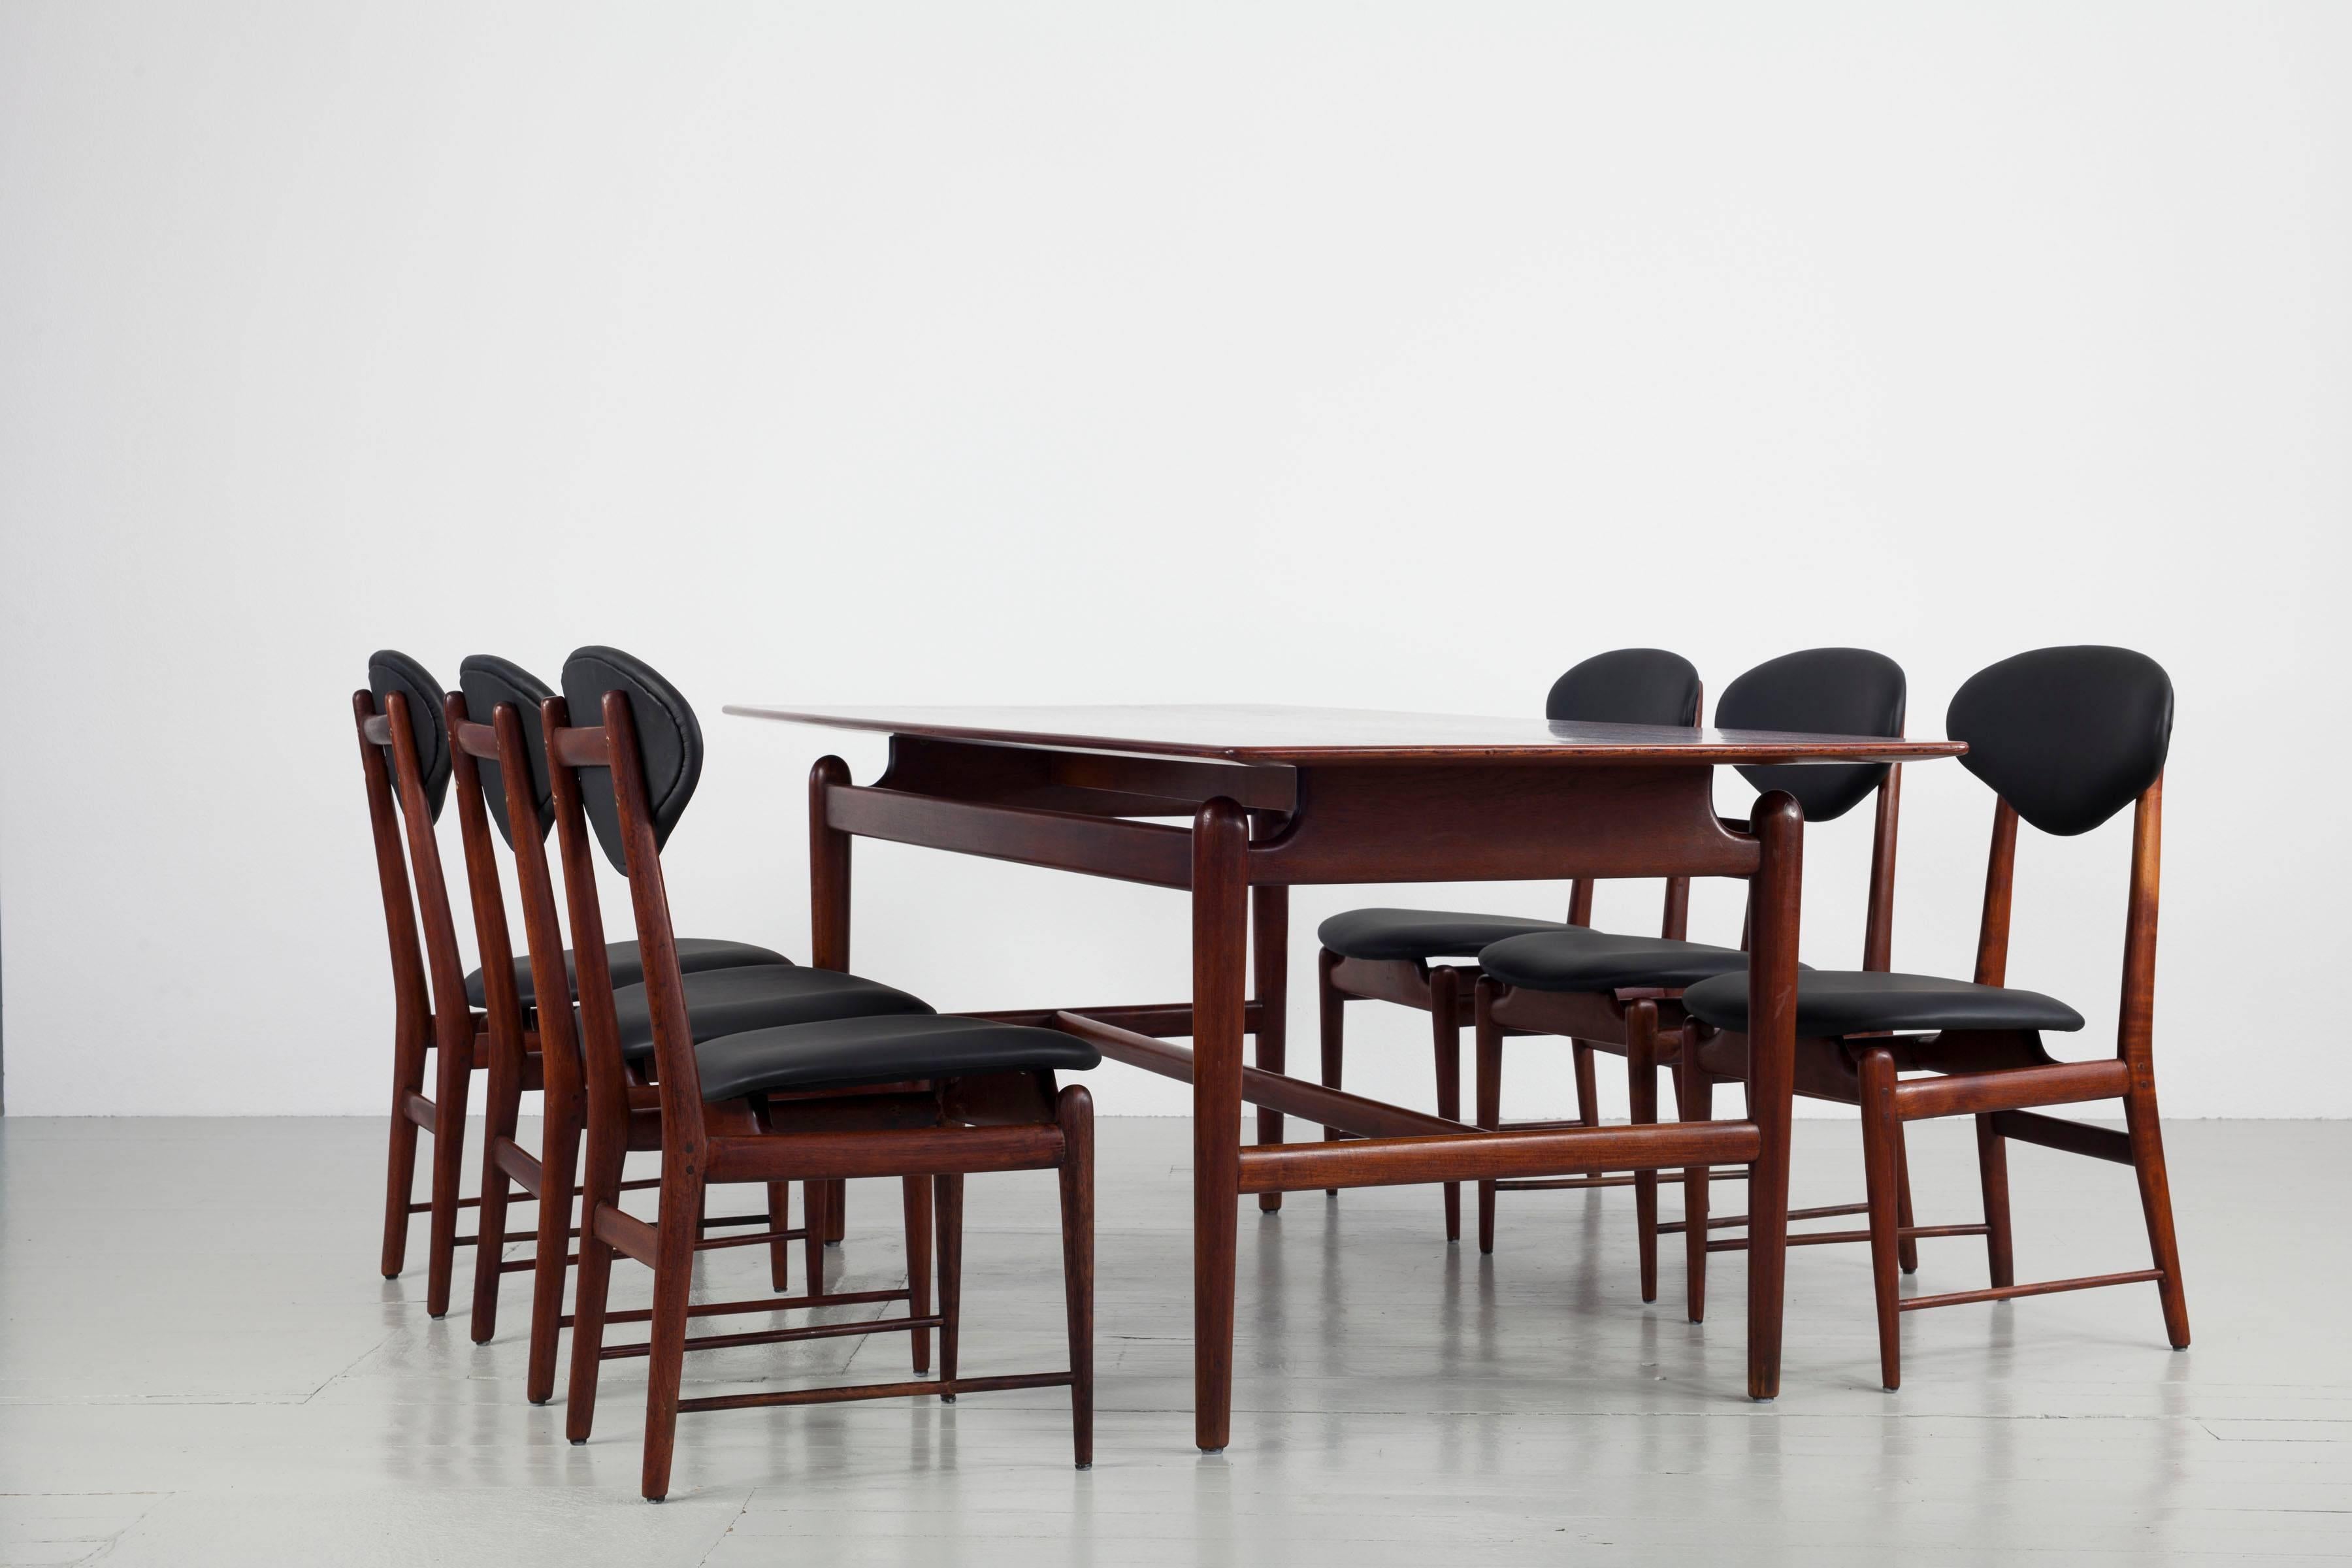 This set of six dining chairs was made in Italy in the 1960s. The chairs are made of glossy lacquered teak and the upholstered surfaces are reupholstered in black leather. The special design element of these pieces is undoubtedly the floating seat